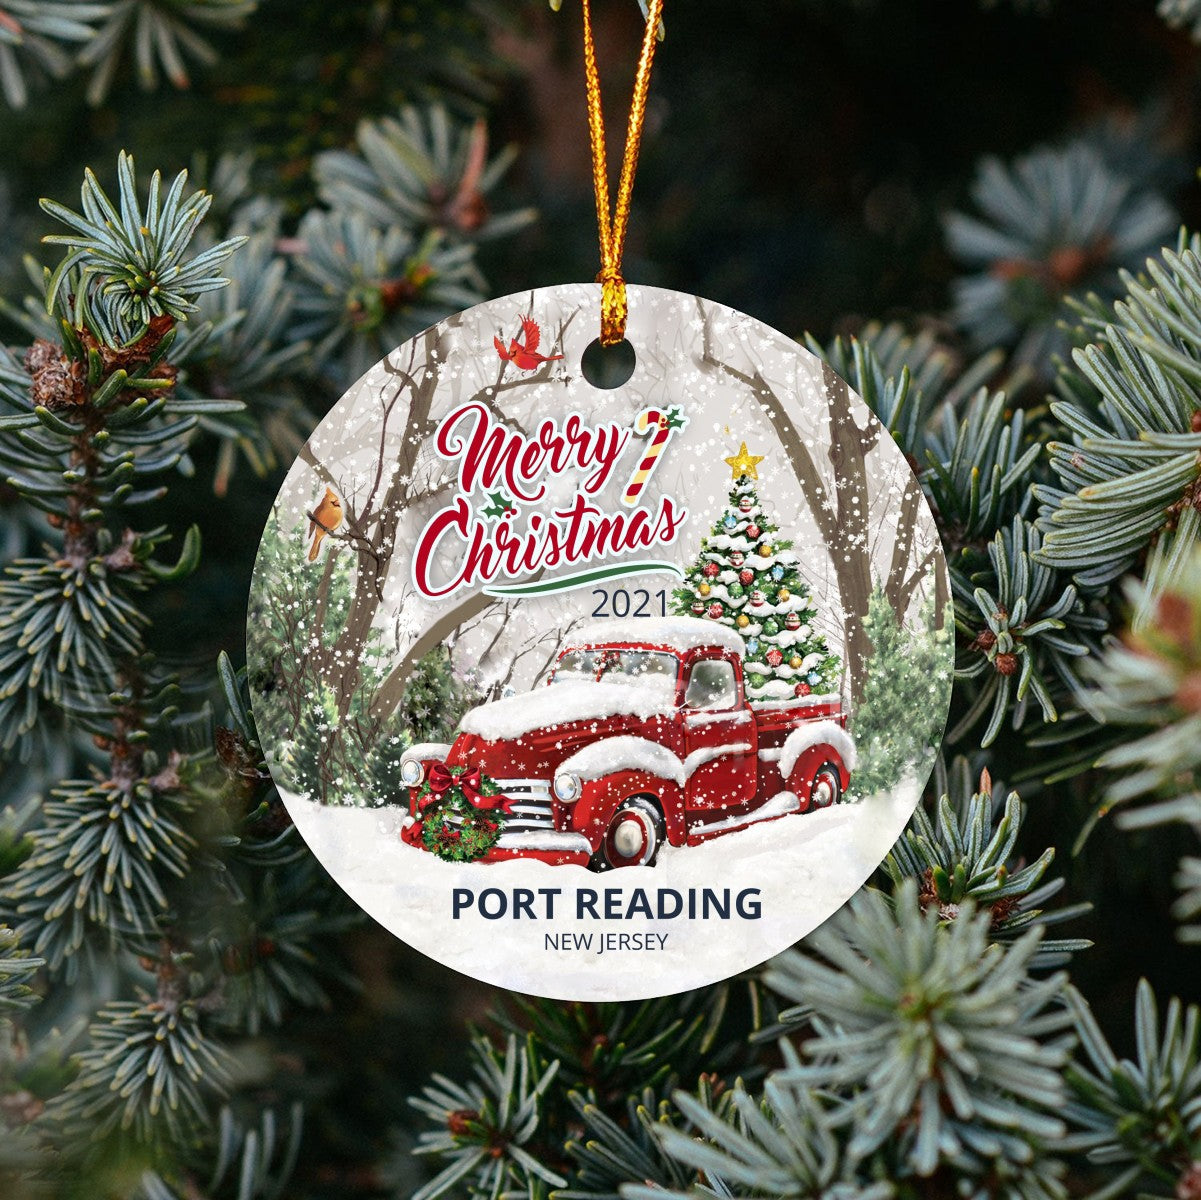 Christmas Tree Ornaments Port Reading - Ornament With Name City, State Port Reading New Jersey NJ Ornament - Red Truck Xmas Ornaments 3'' Plastic Gift For Family, Friend And Housewarming